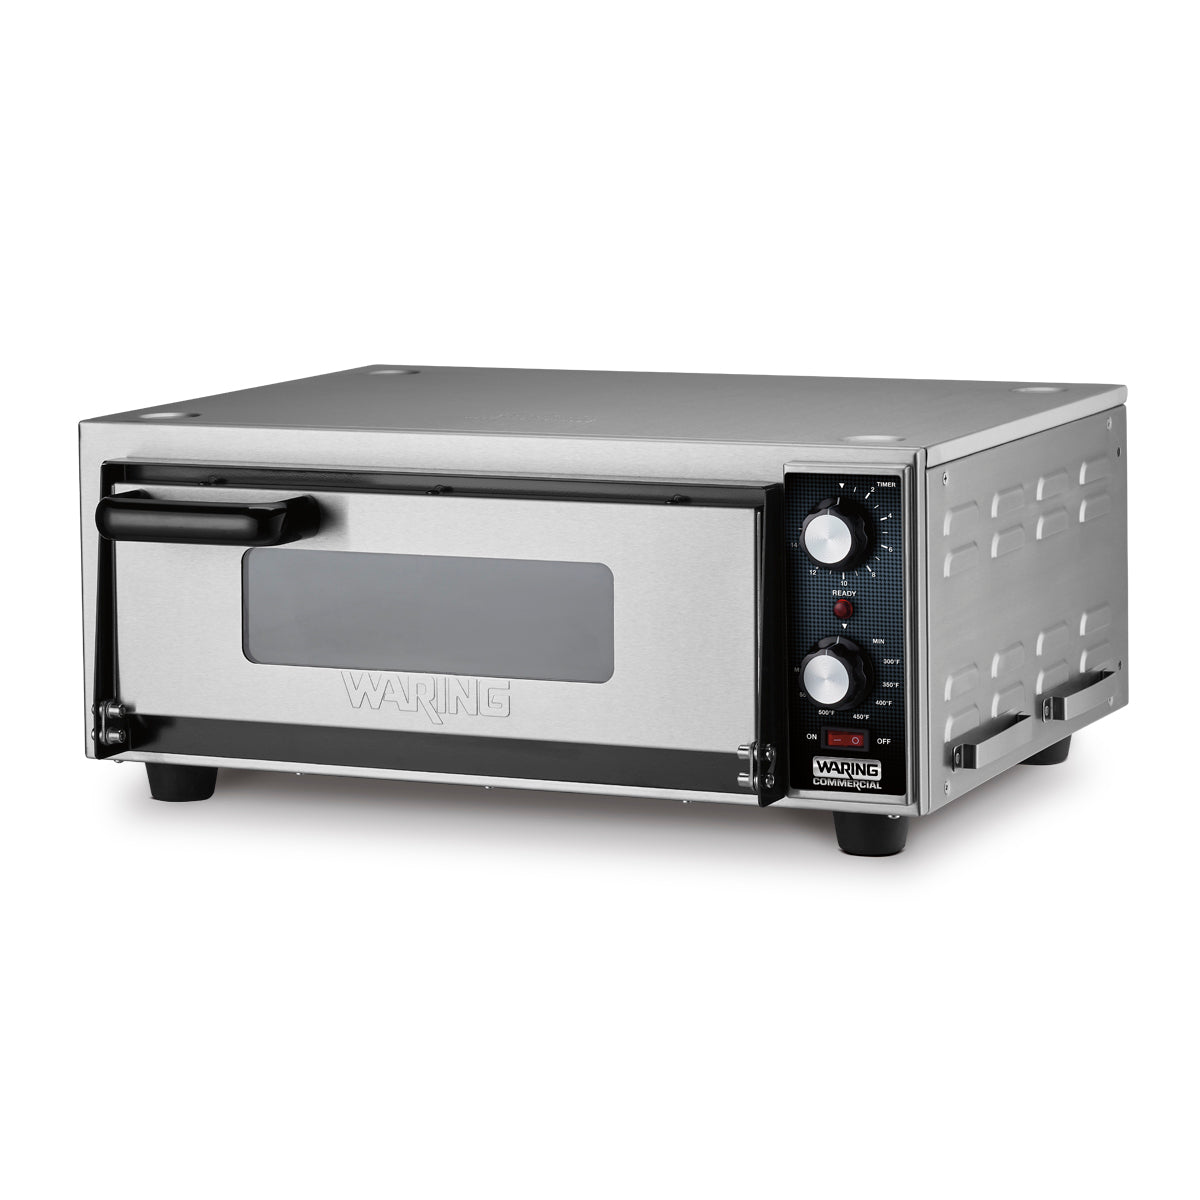 WPO100 Single-Deck Commercial Pizza Oven by Waring Commercial